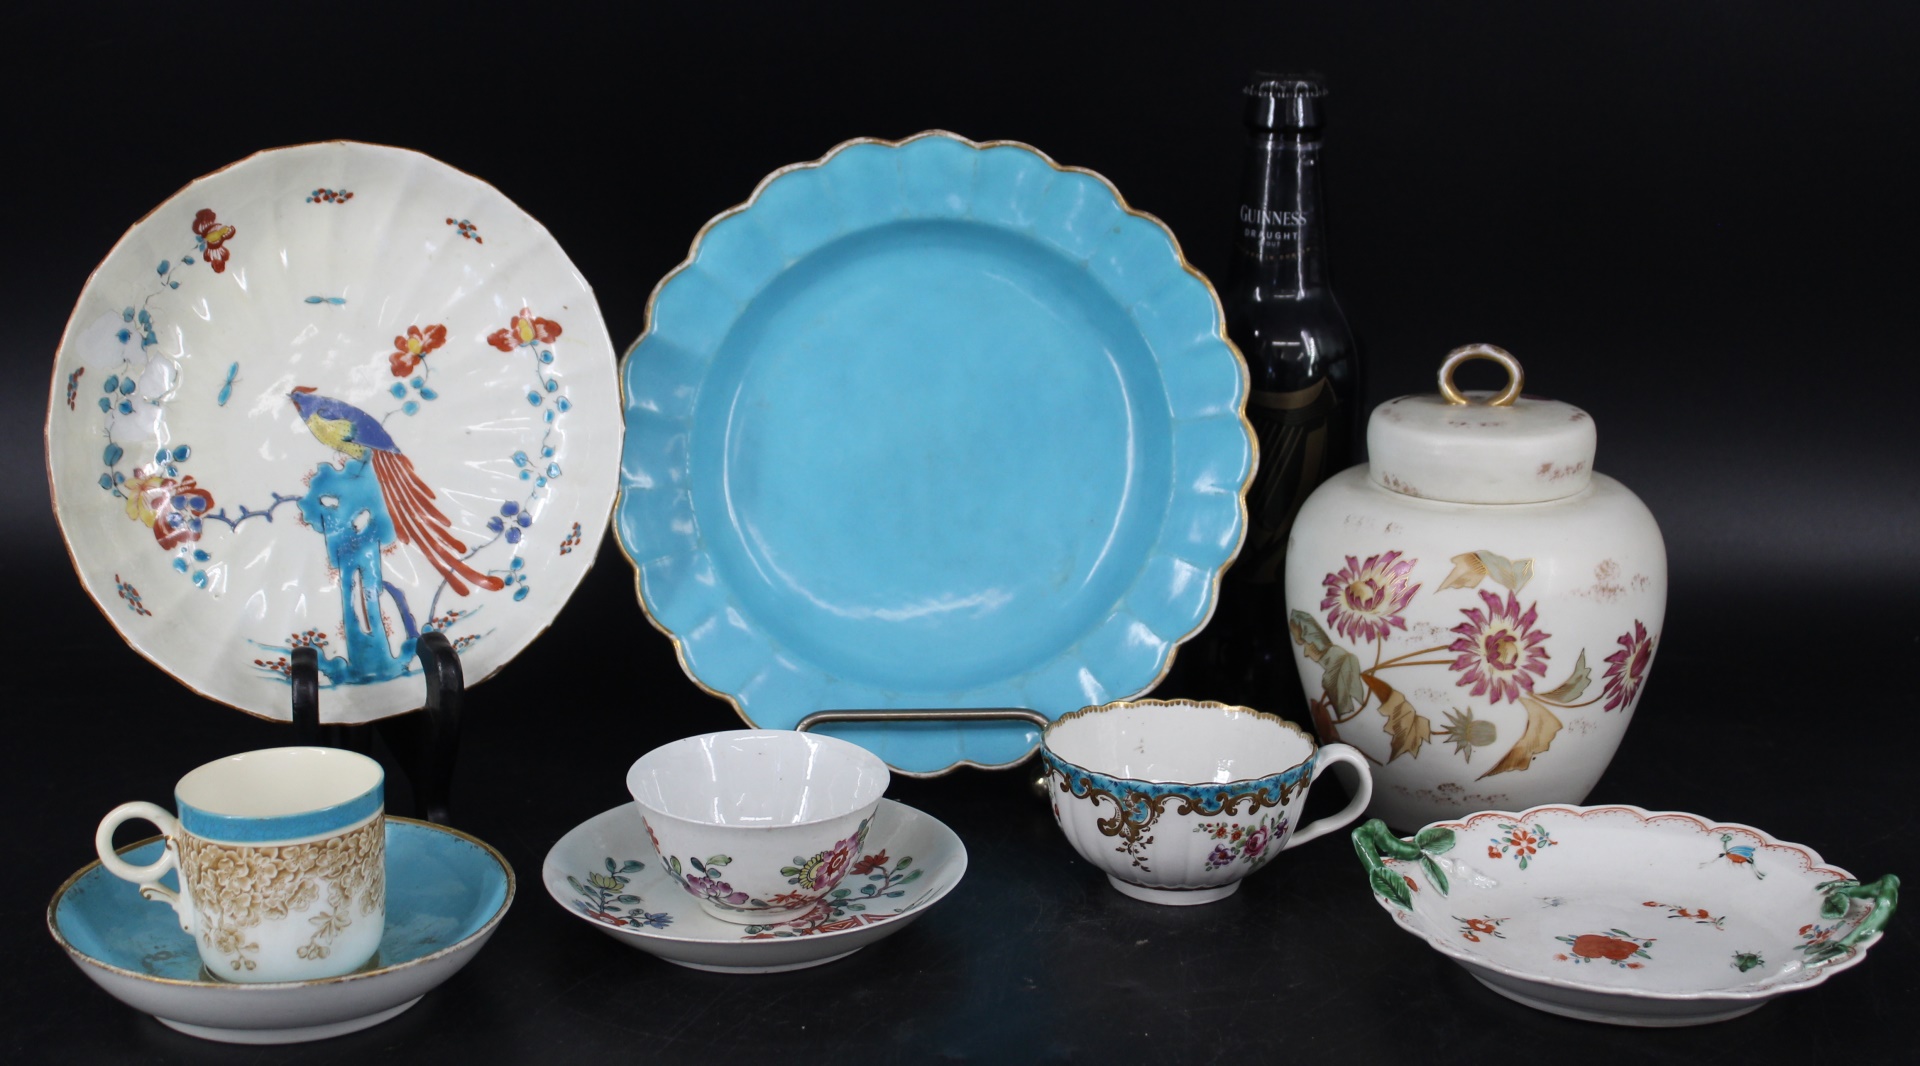 WORCESTER PORCELAIN GROUPING To 3b7e52